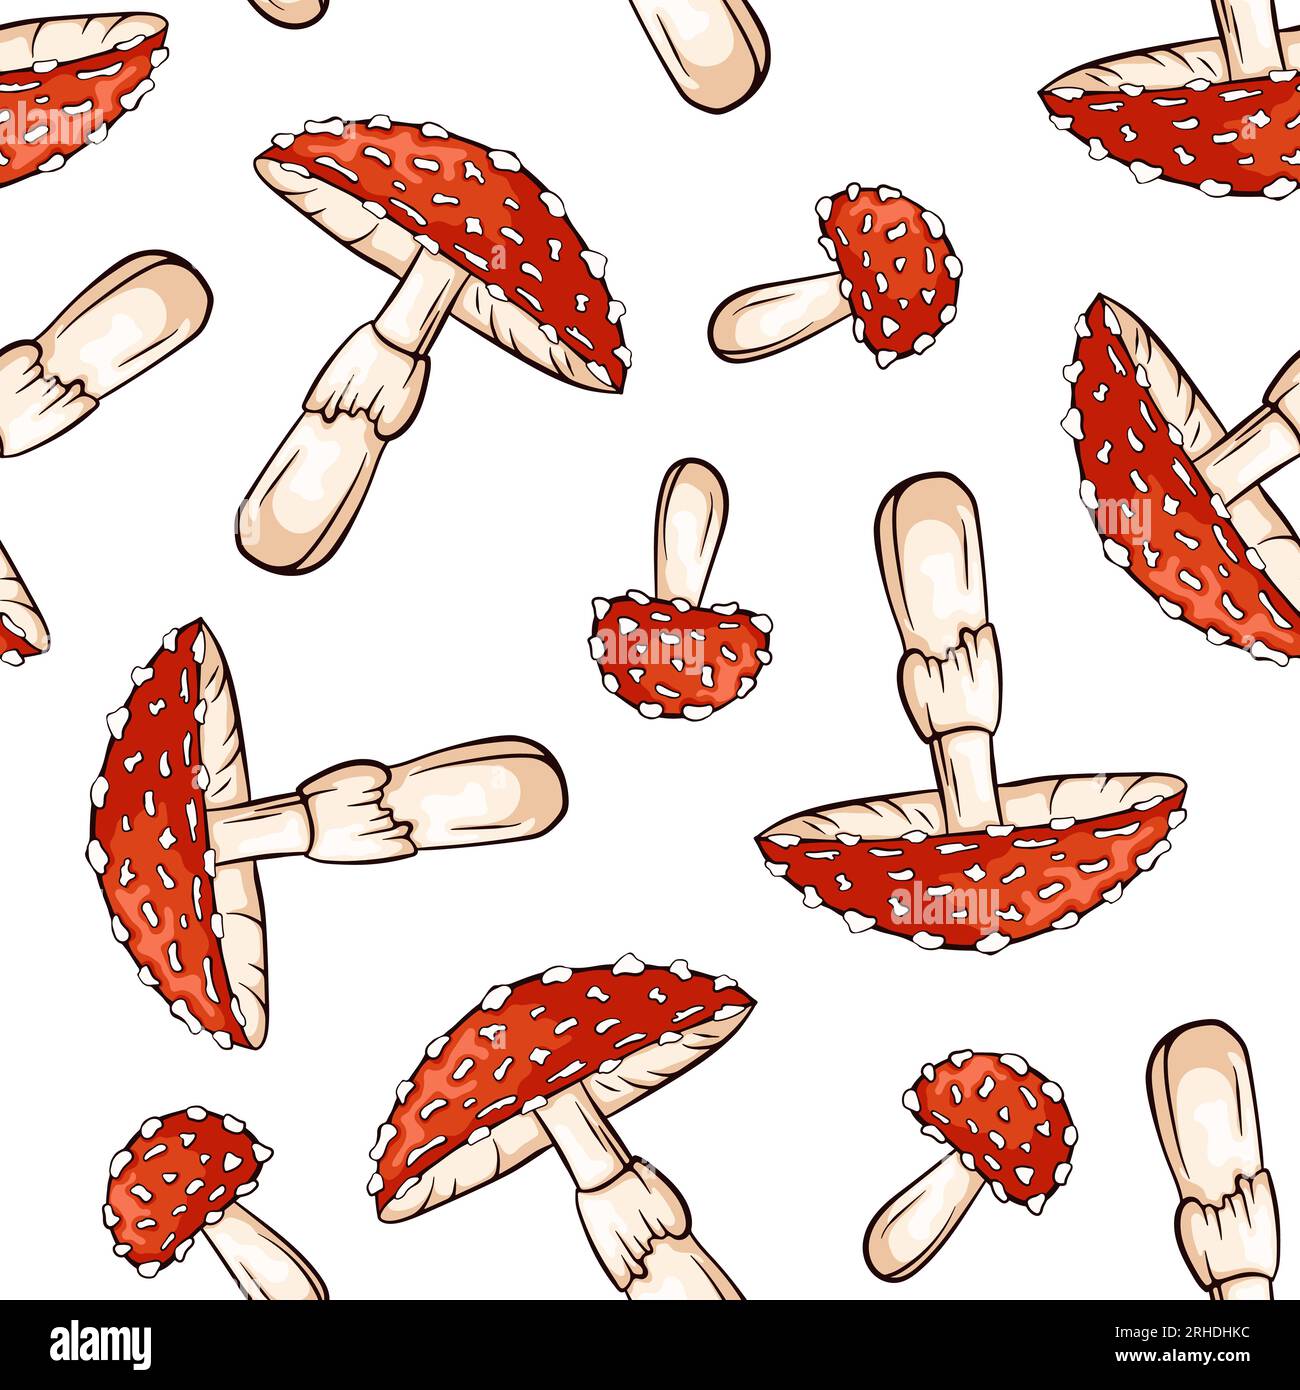 Fly agaric inedible mushroom seamless pattern. Amanita Muscaria texture design for textile, wrapping paper, decor. Vector illustration isolated on a Stock Vector